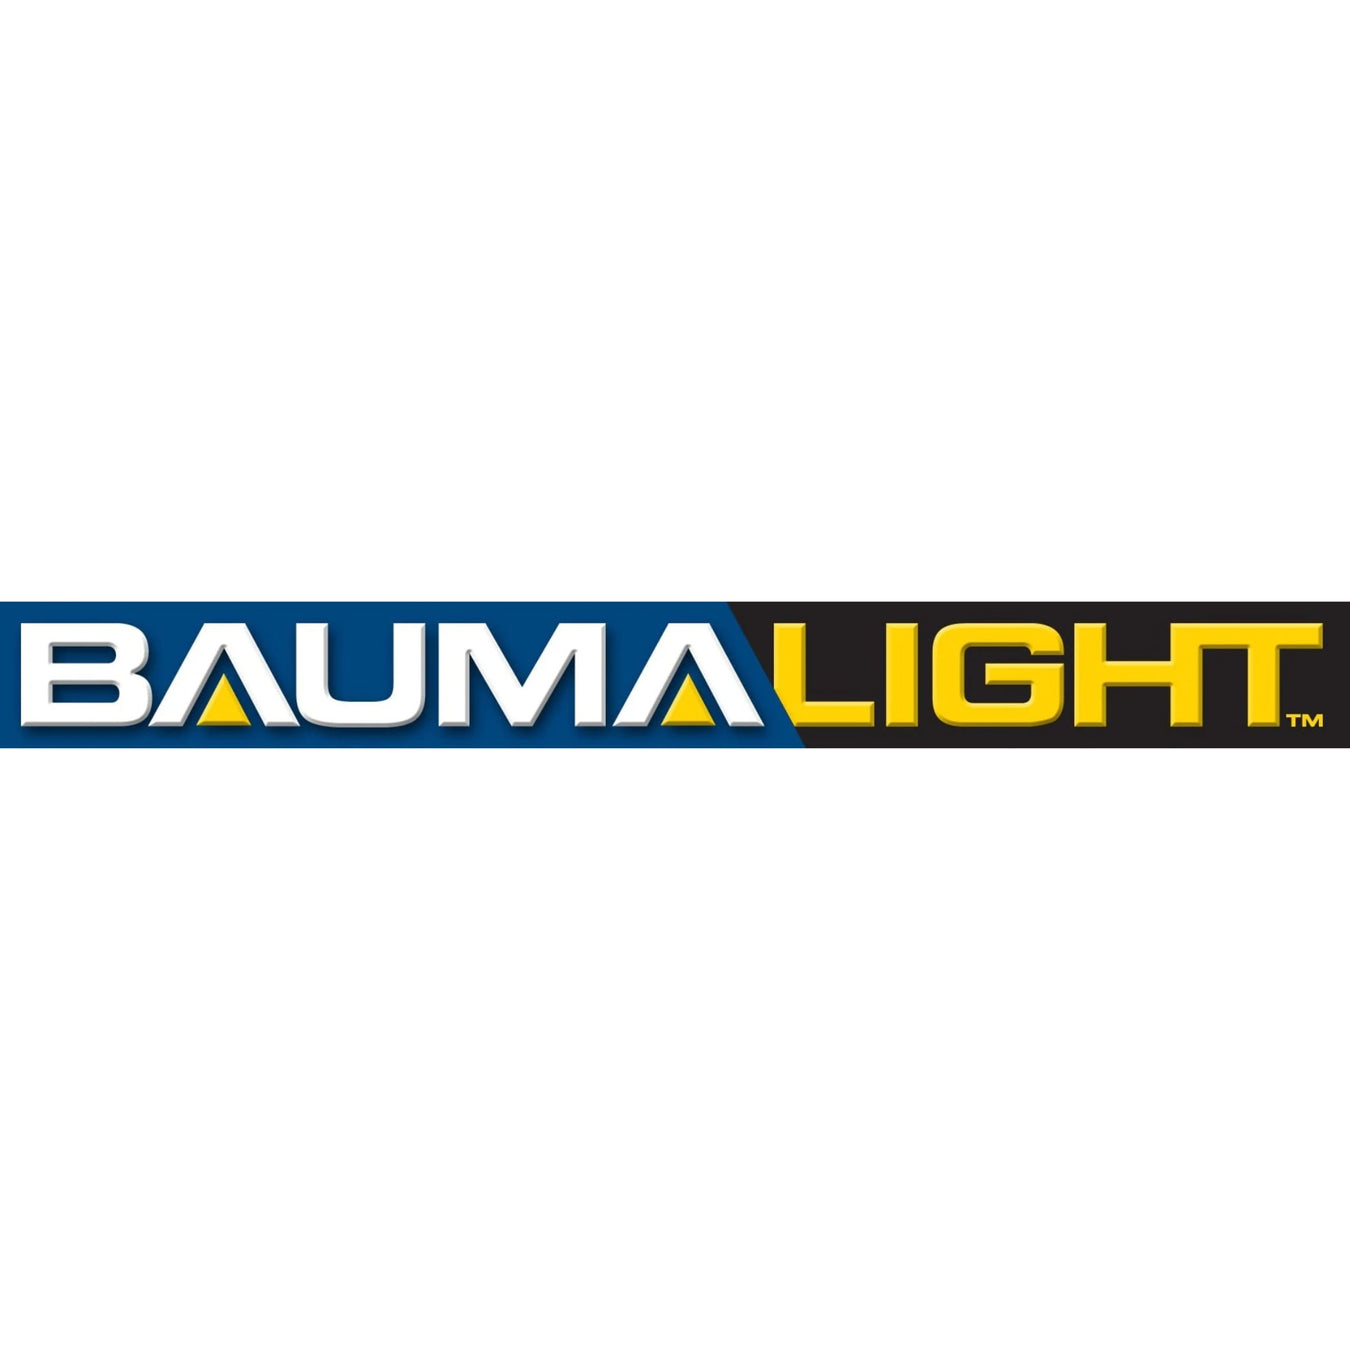 Baumalight Attachments and Forestry Equipment Brand Logo